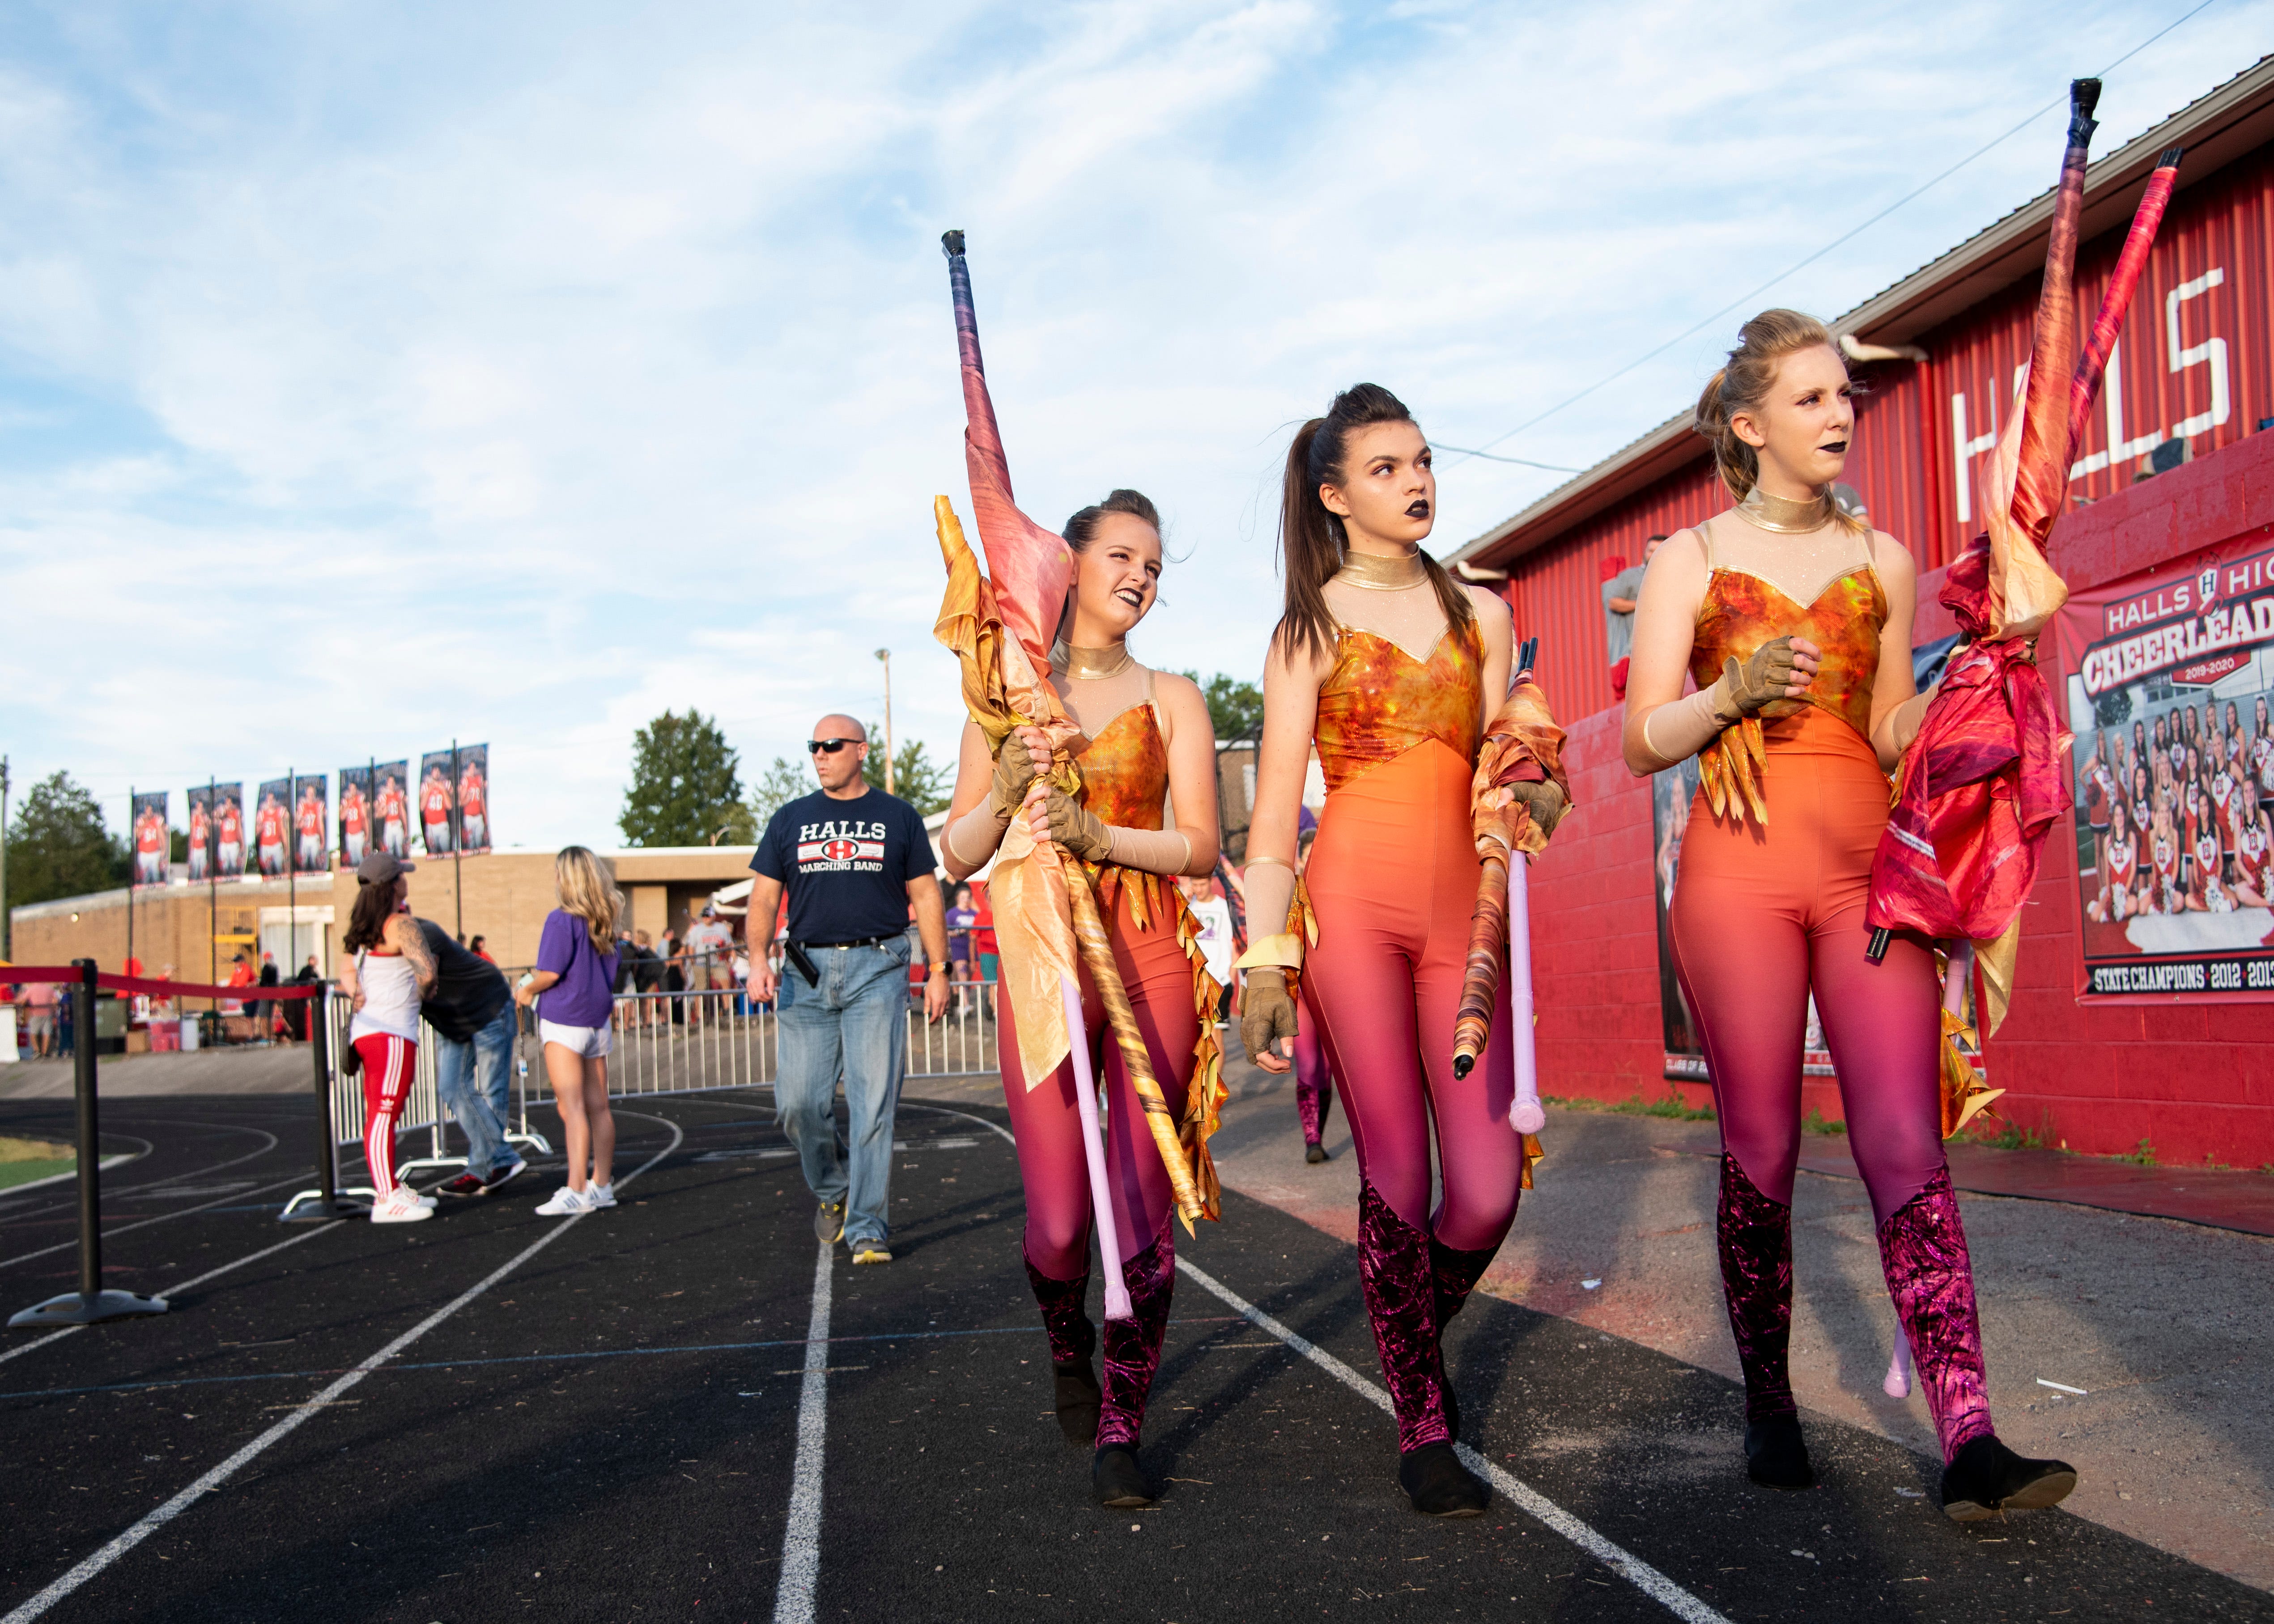 Halls color guard members before the Halls and Central high school football game on Friday, October 4, 2019 at Halls High School.